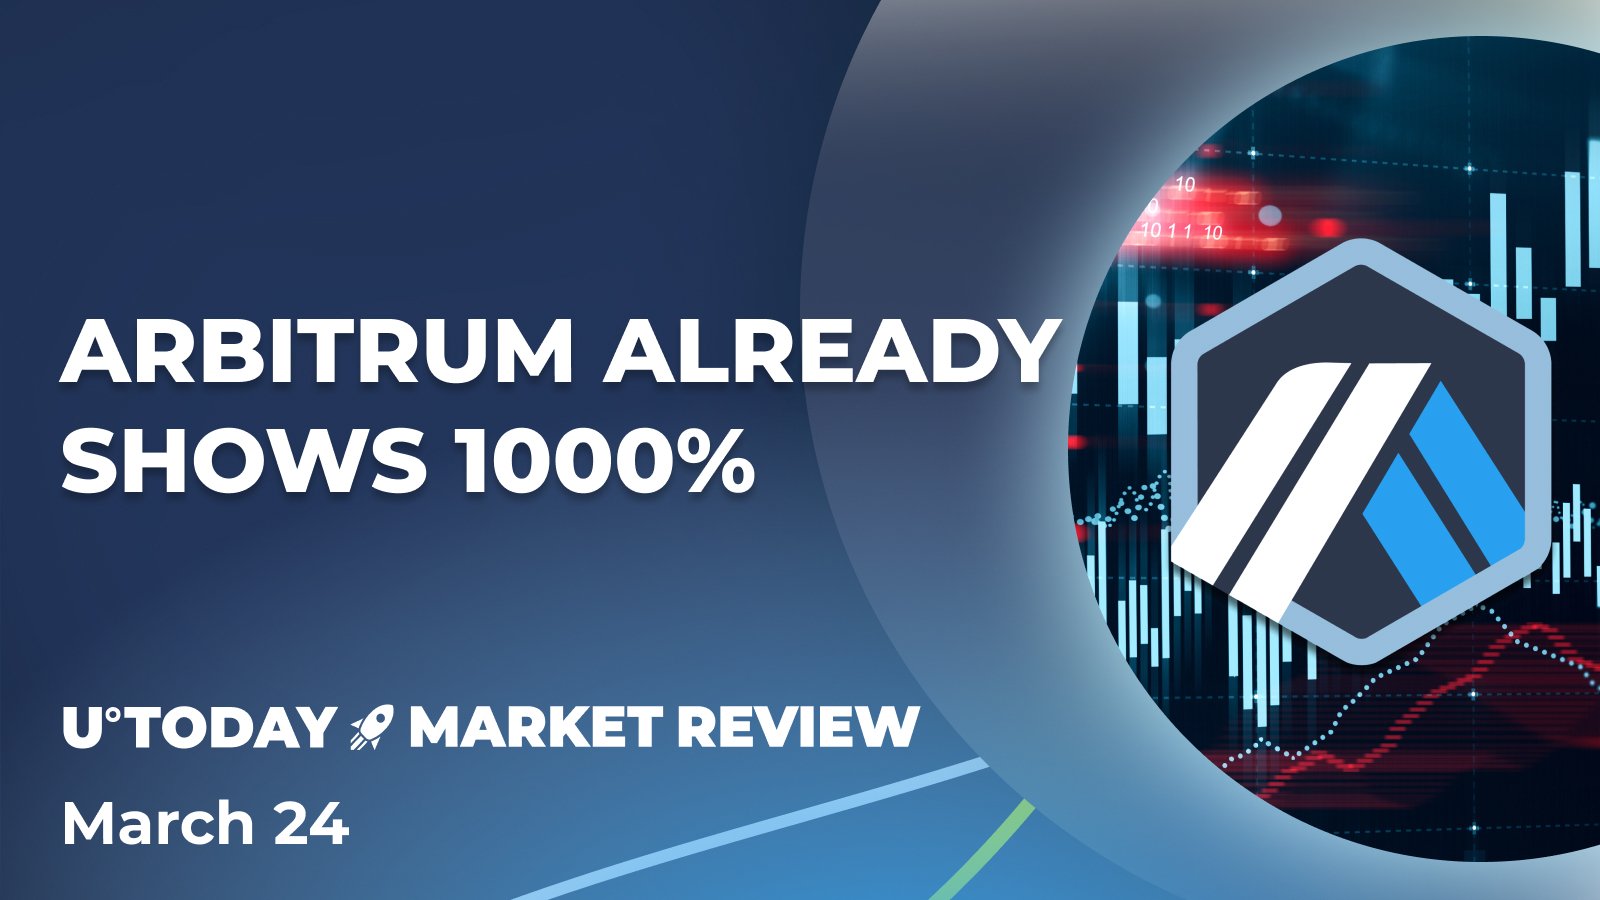 Arbitrum (ARB) Token up Almost 1,000% From Bottom 24 Hours After Trading Starts